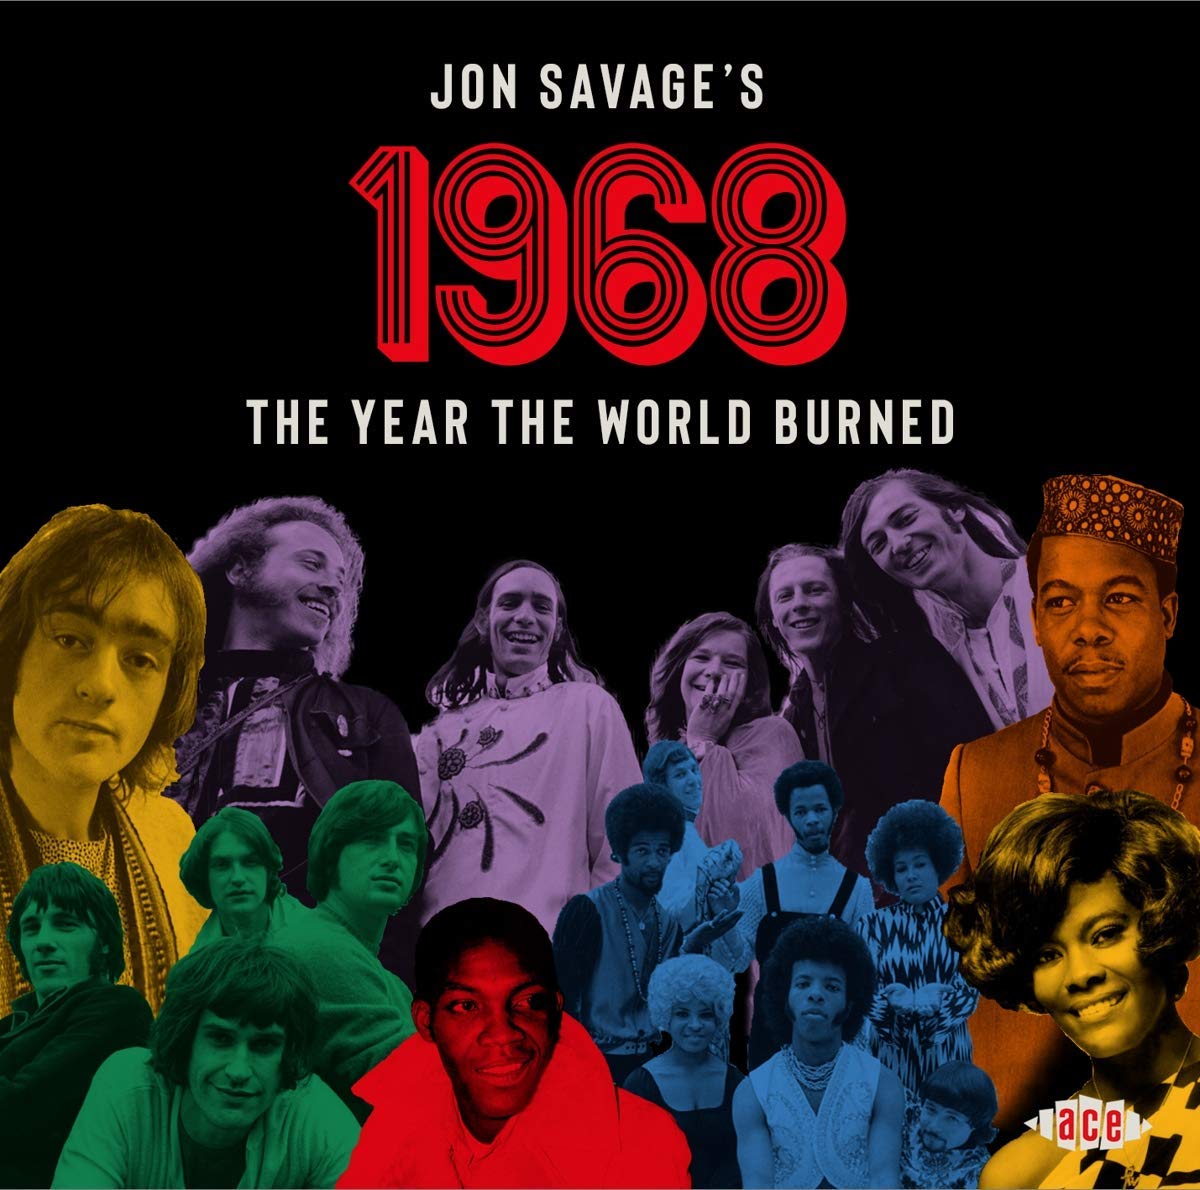 V.A. / JON SAVAGE'S 1968 THE YEAR THE WORLD BURNED